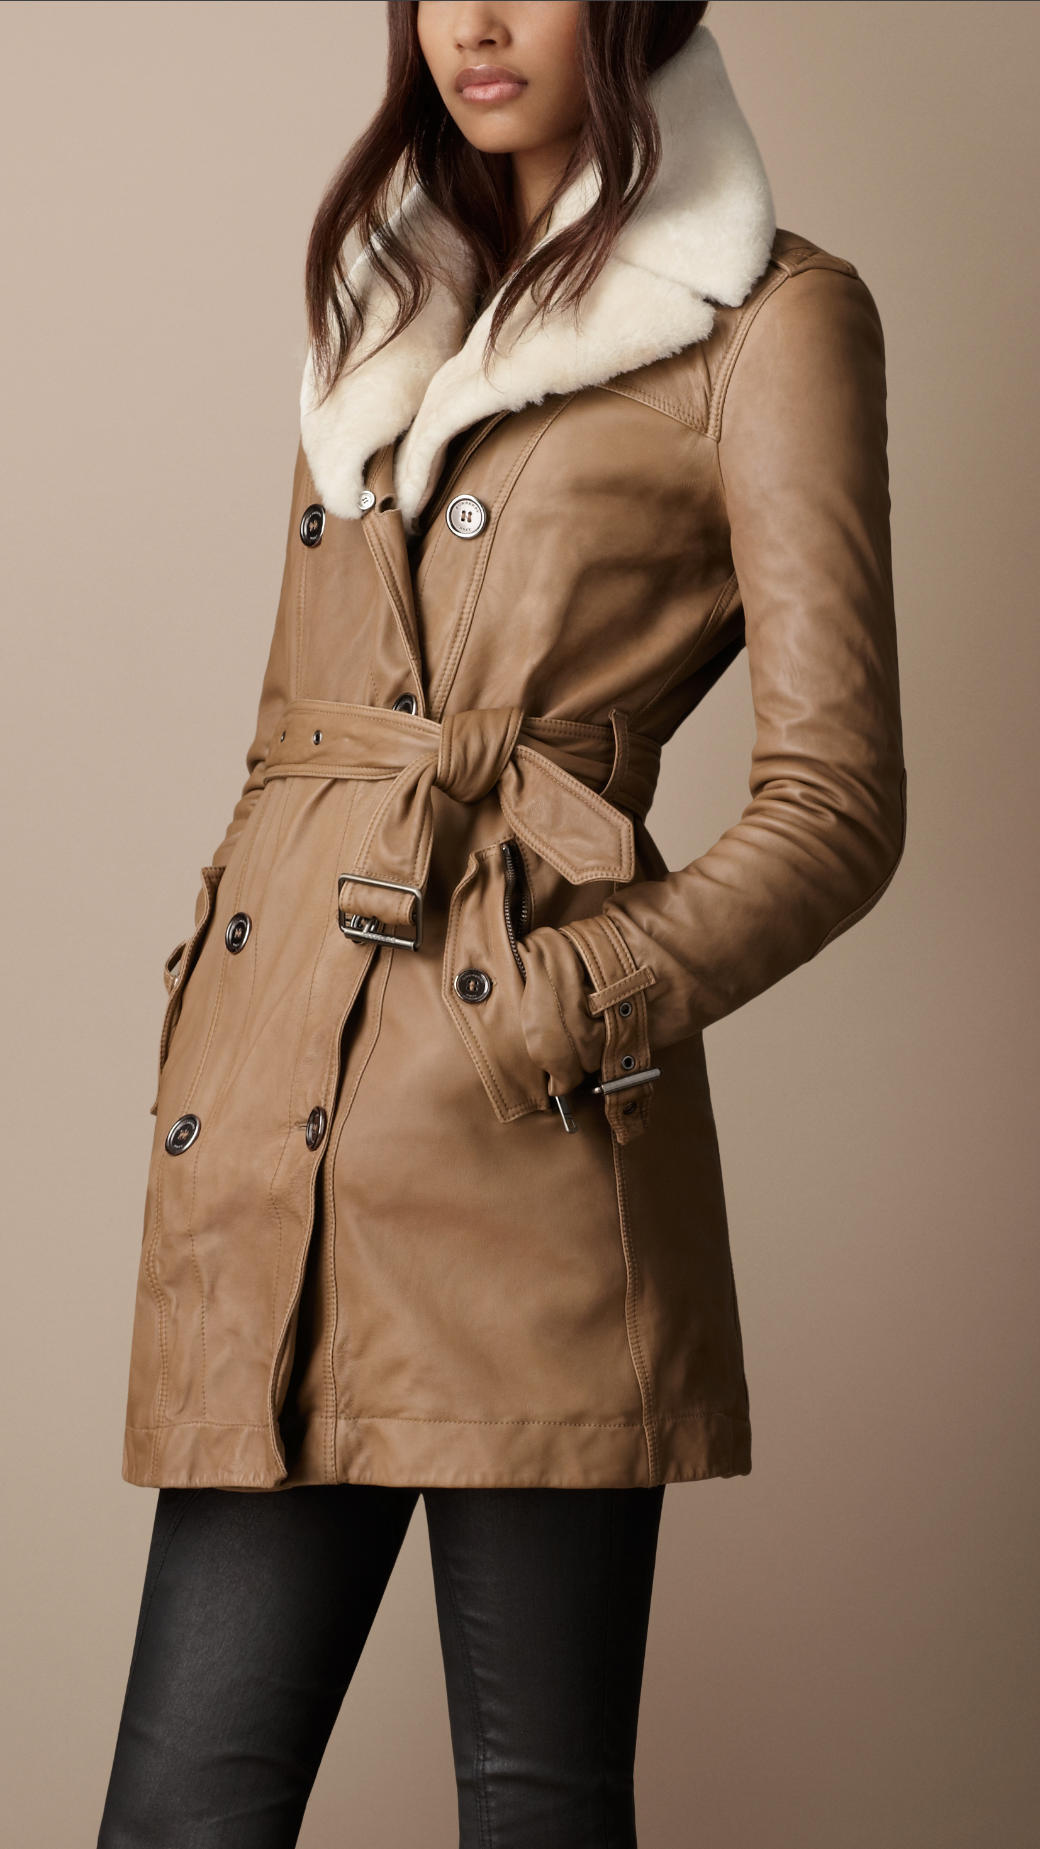 Lyst - Burberry brit Midlength Shearling Collar Leather Trench Coat in ...